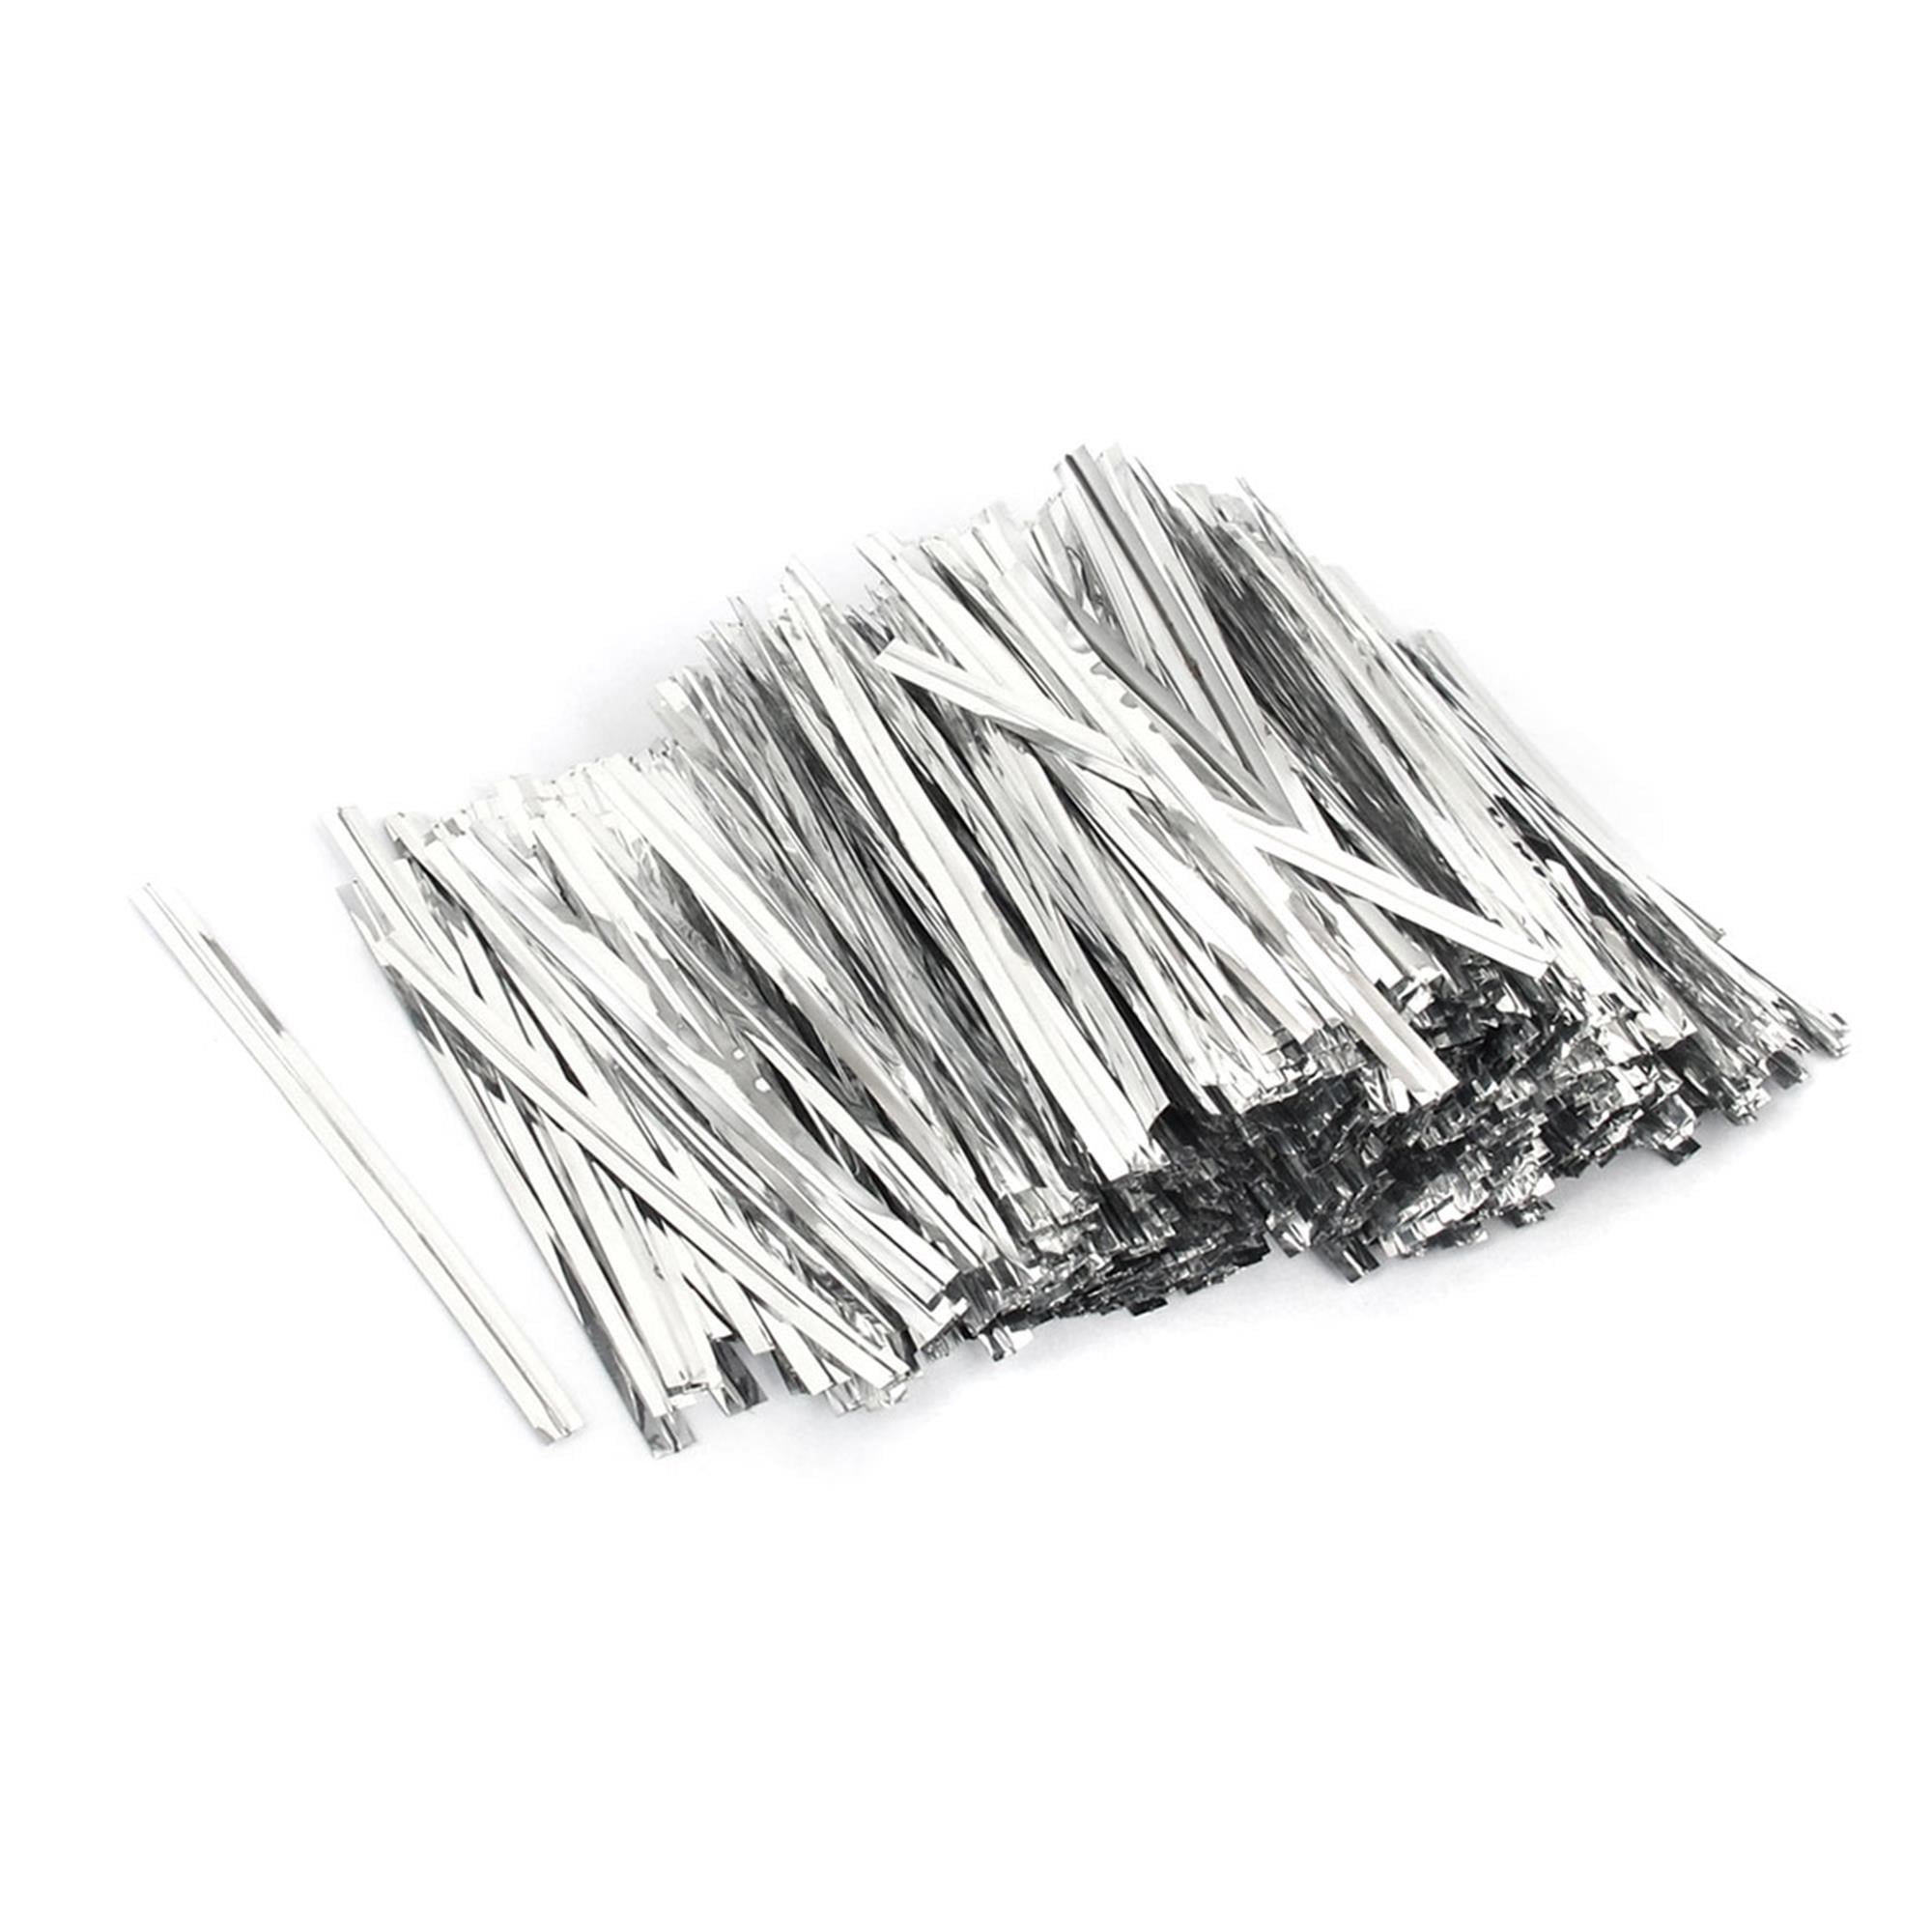 4000-Pack Long Metal Twist Tie Wrapping String for Wedding Party Candy ...